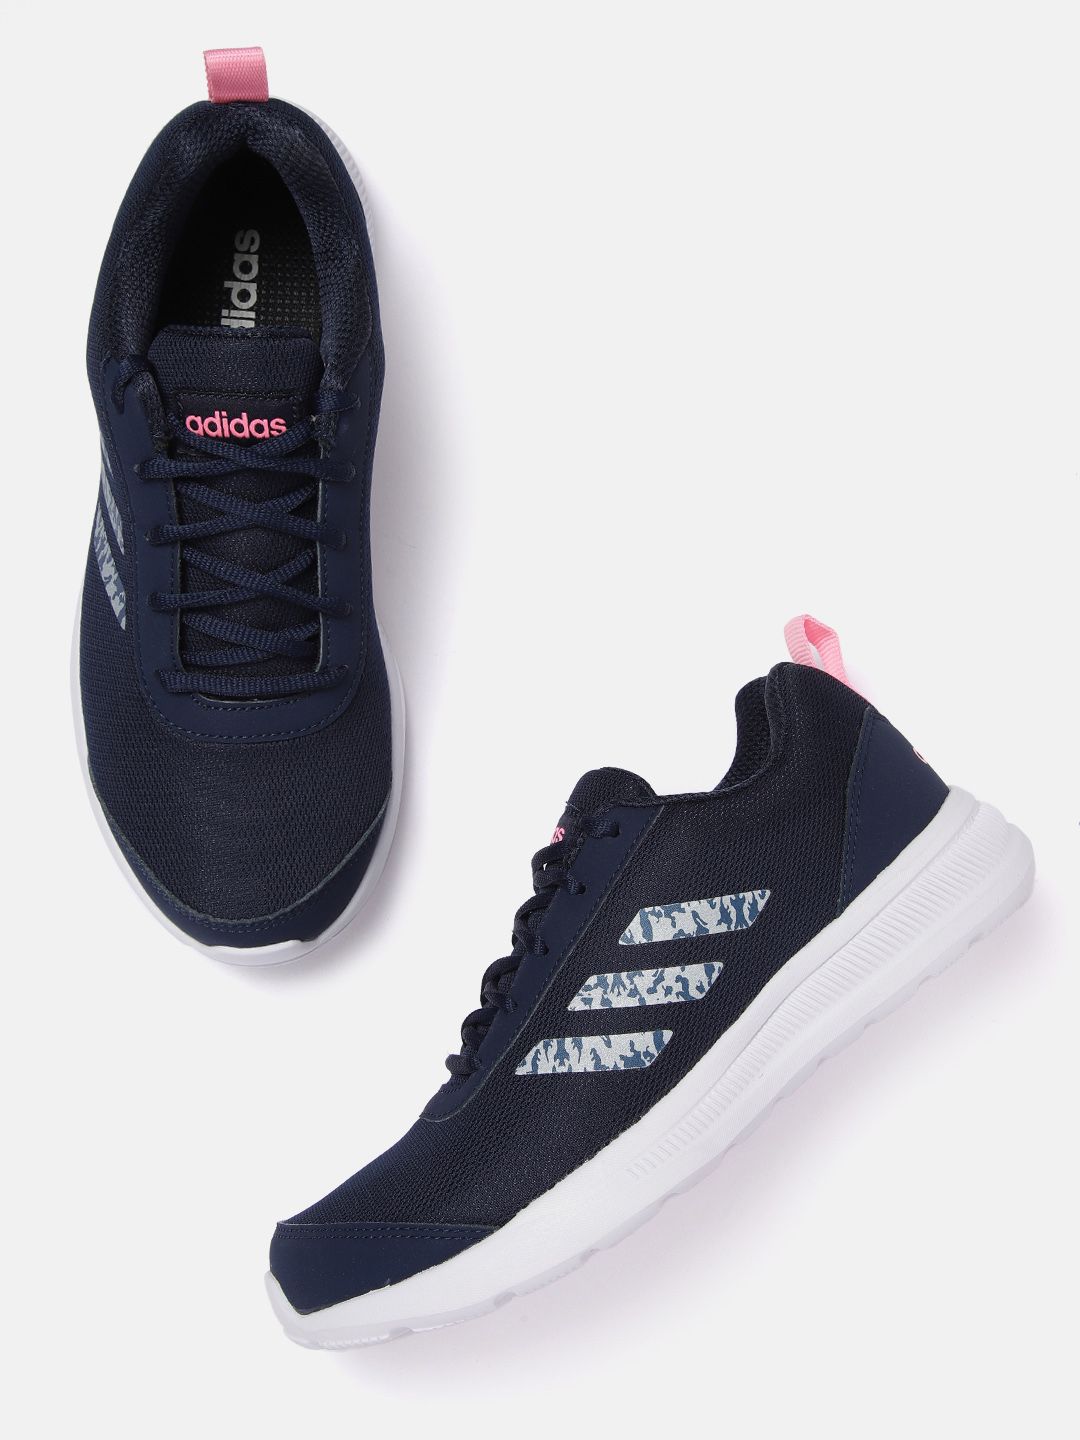 ADIDAS Women Navy Blue Woven Design StreetAhead Running Shoes Price in India